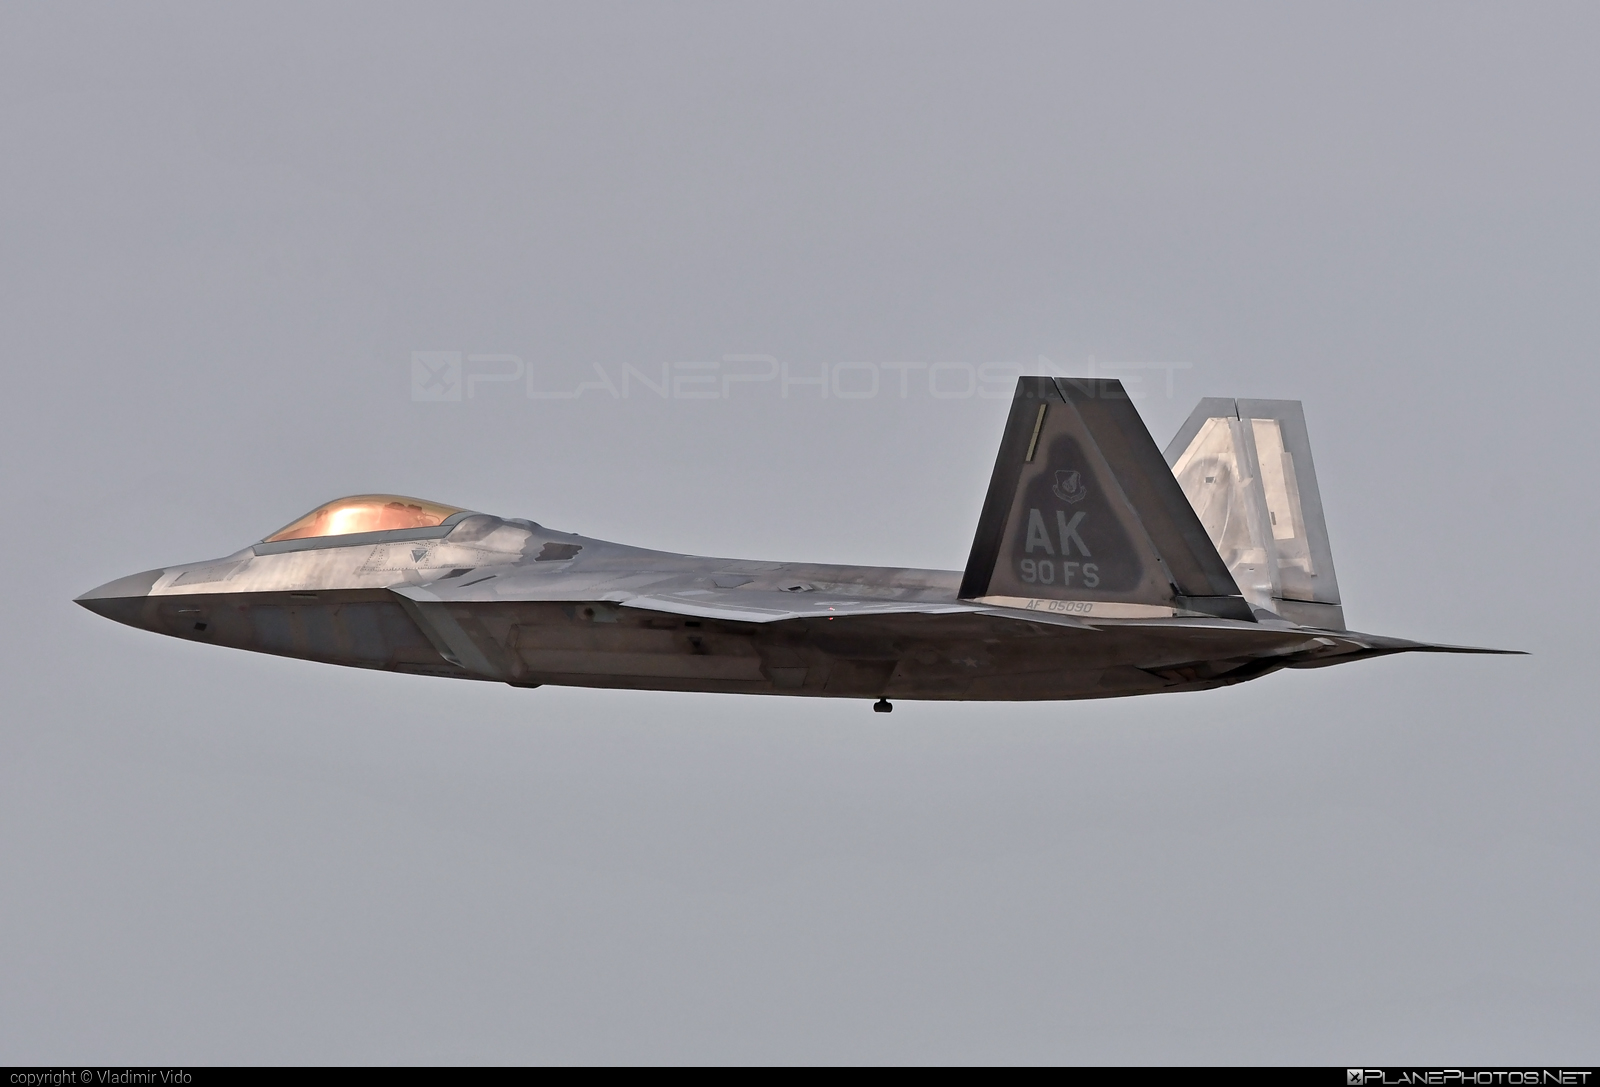 Lockheed Martin F-22A Raptor - 05-4090 operated by US Air Force (USAF) #f22 #f22a #f22aRaptor #f22raptor #lockheedMartin #lockheedMartinF22 #lockheedMartinRaptor #raptor #siaf2022 #usaf #usairforce